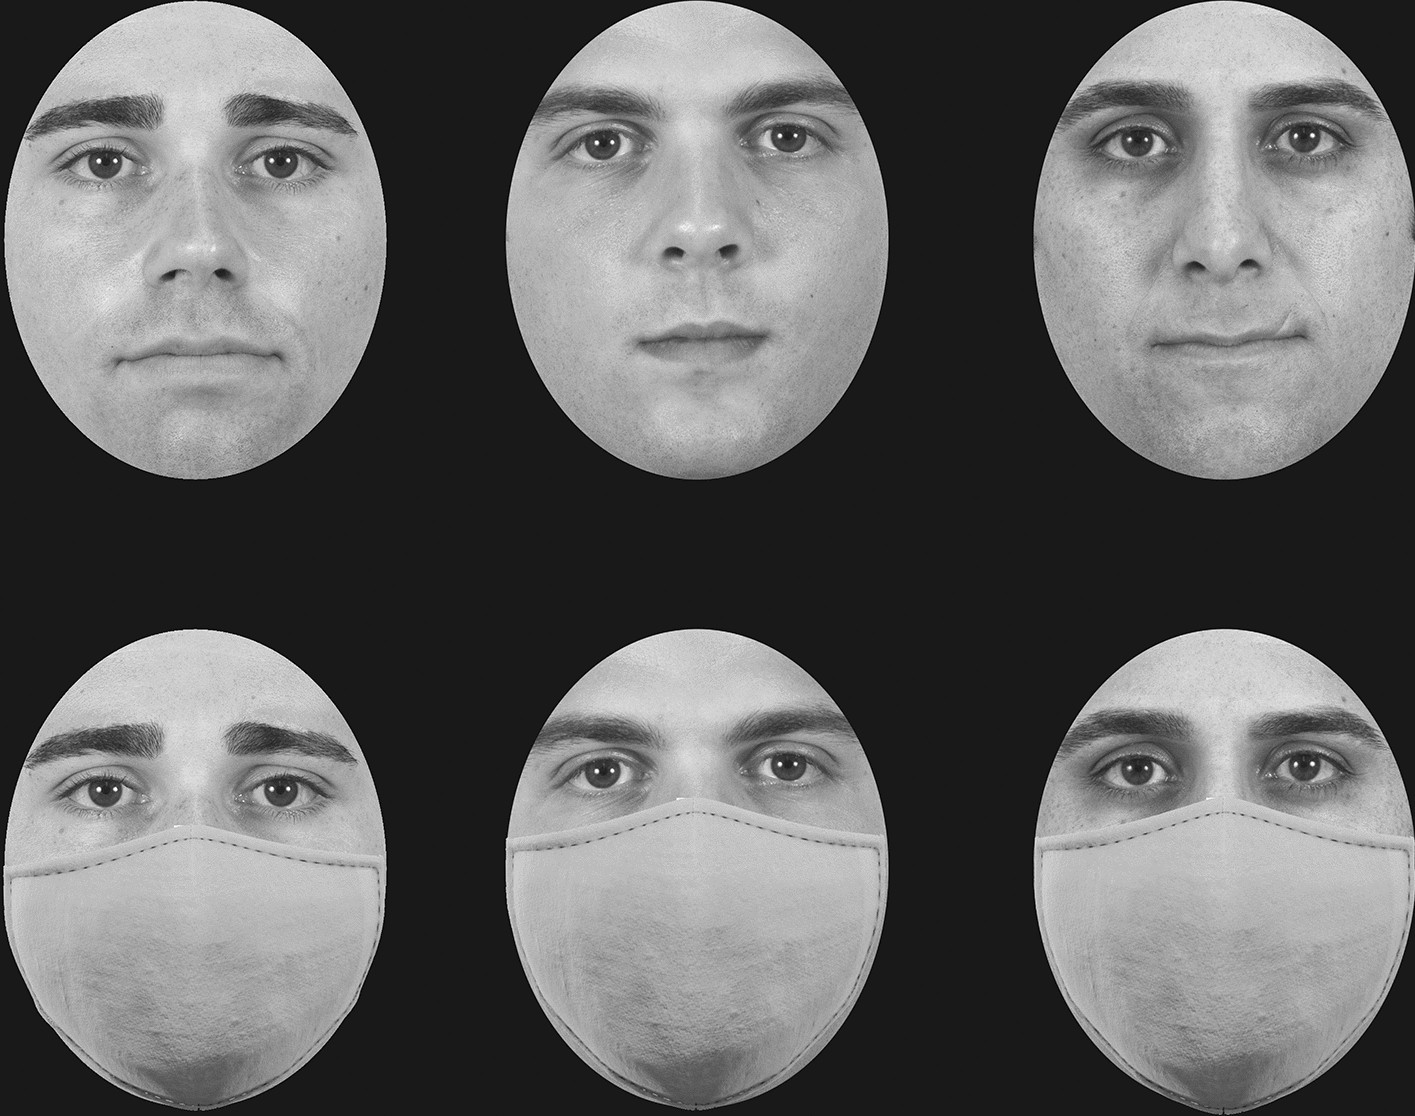 The COVID-19 pandemic masks the way people perceive faces Scientific Reports photo image